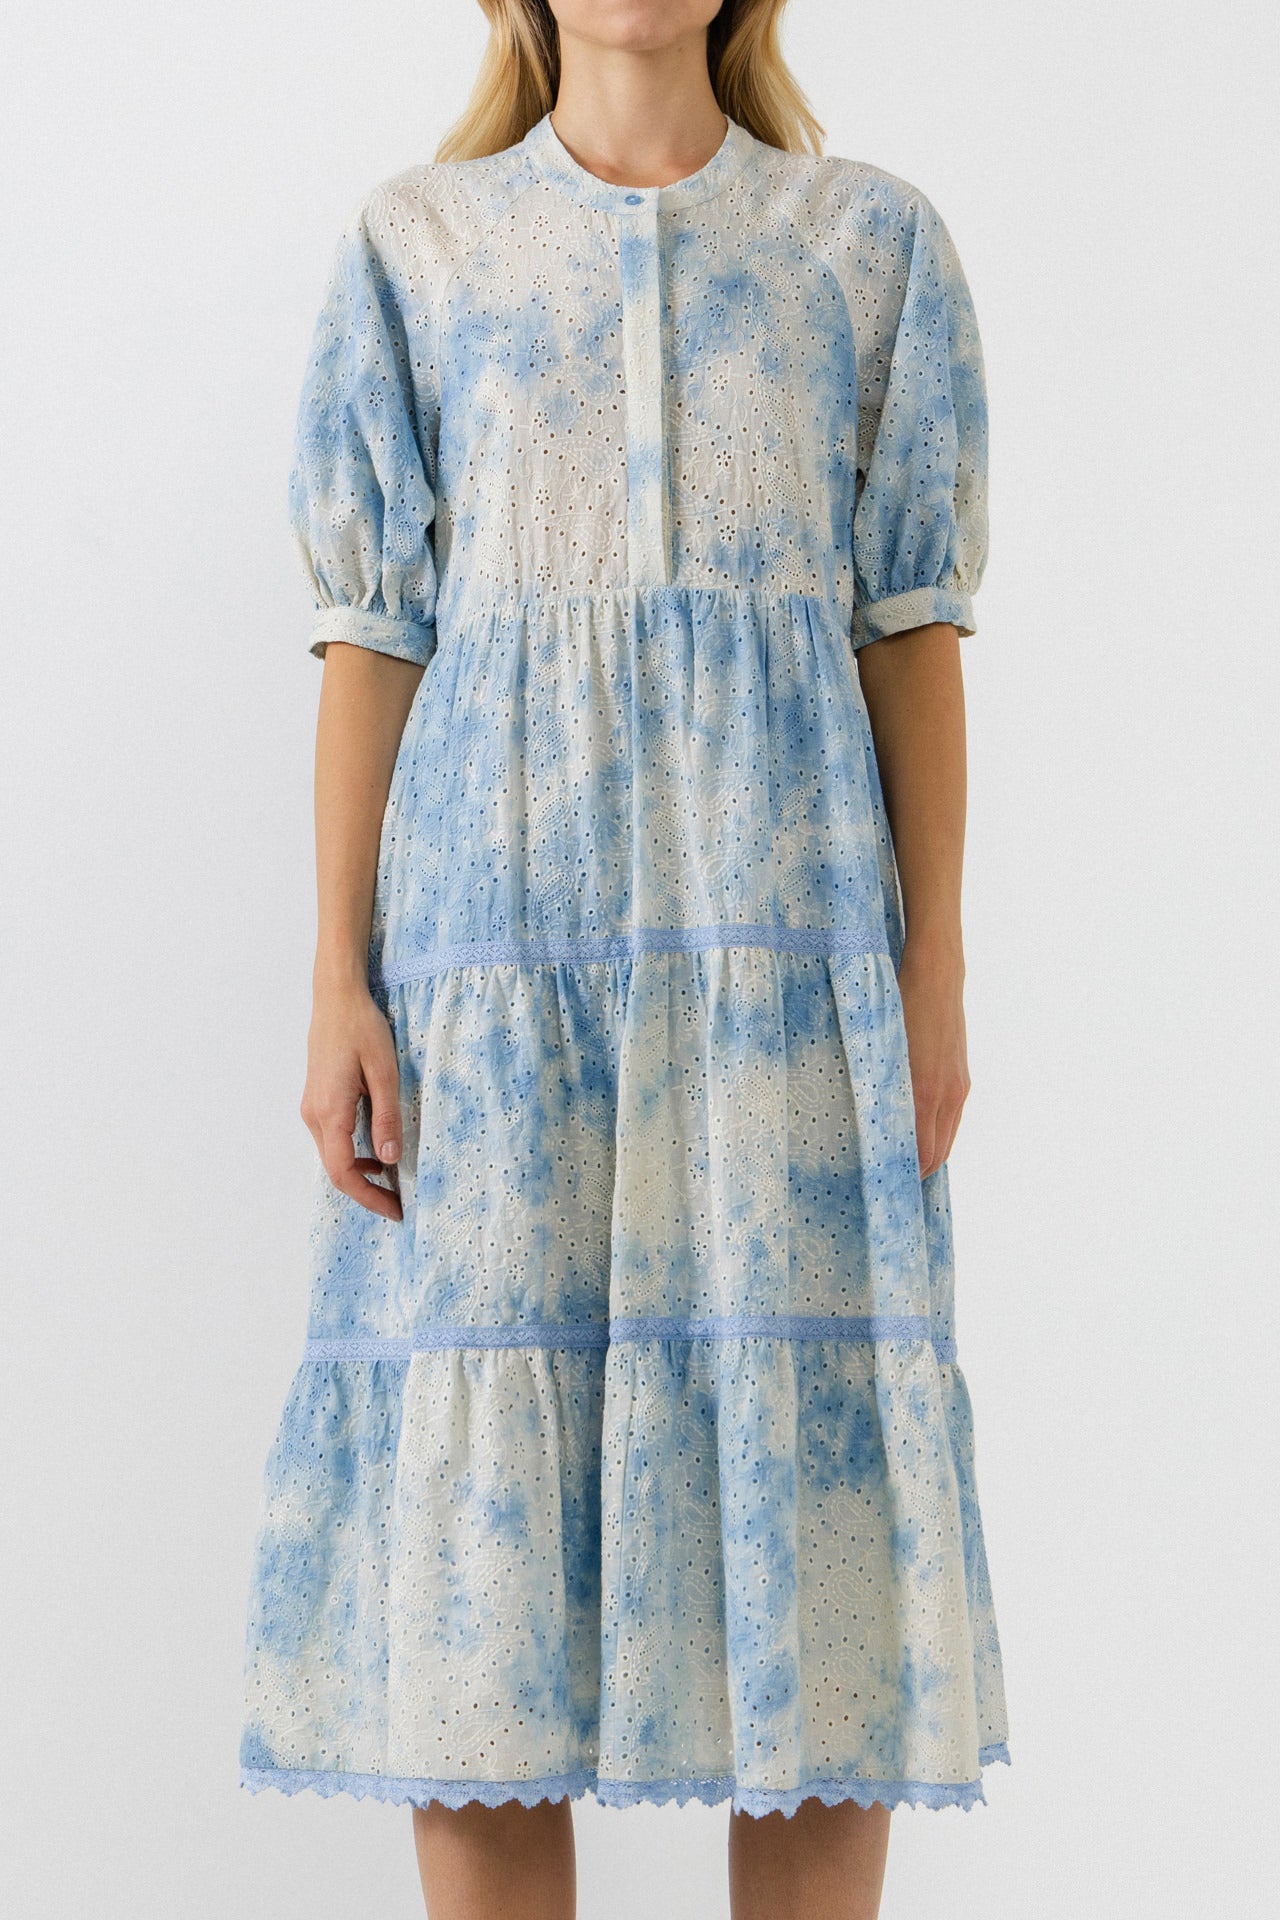 FREE THE ROSES - Paisely Eyelet Midi Dress with Tie-dye Effect - DRESSES available at Objectrare